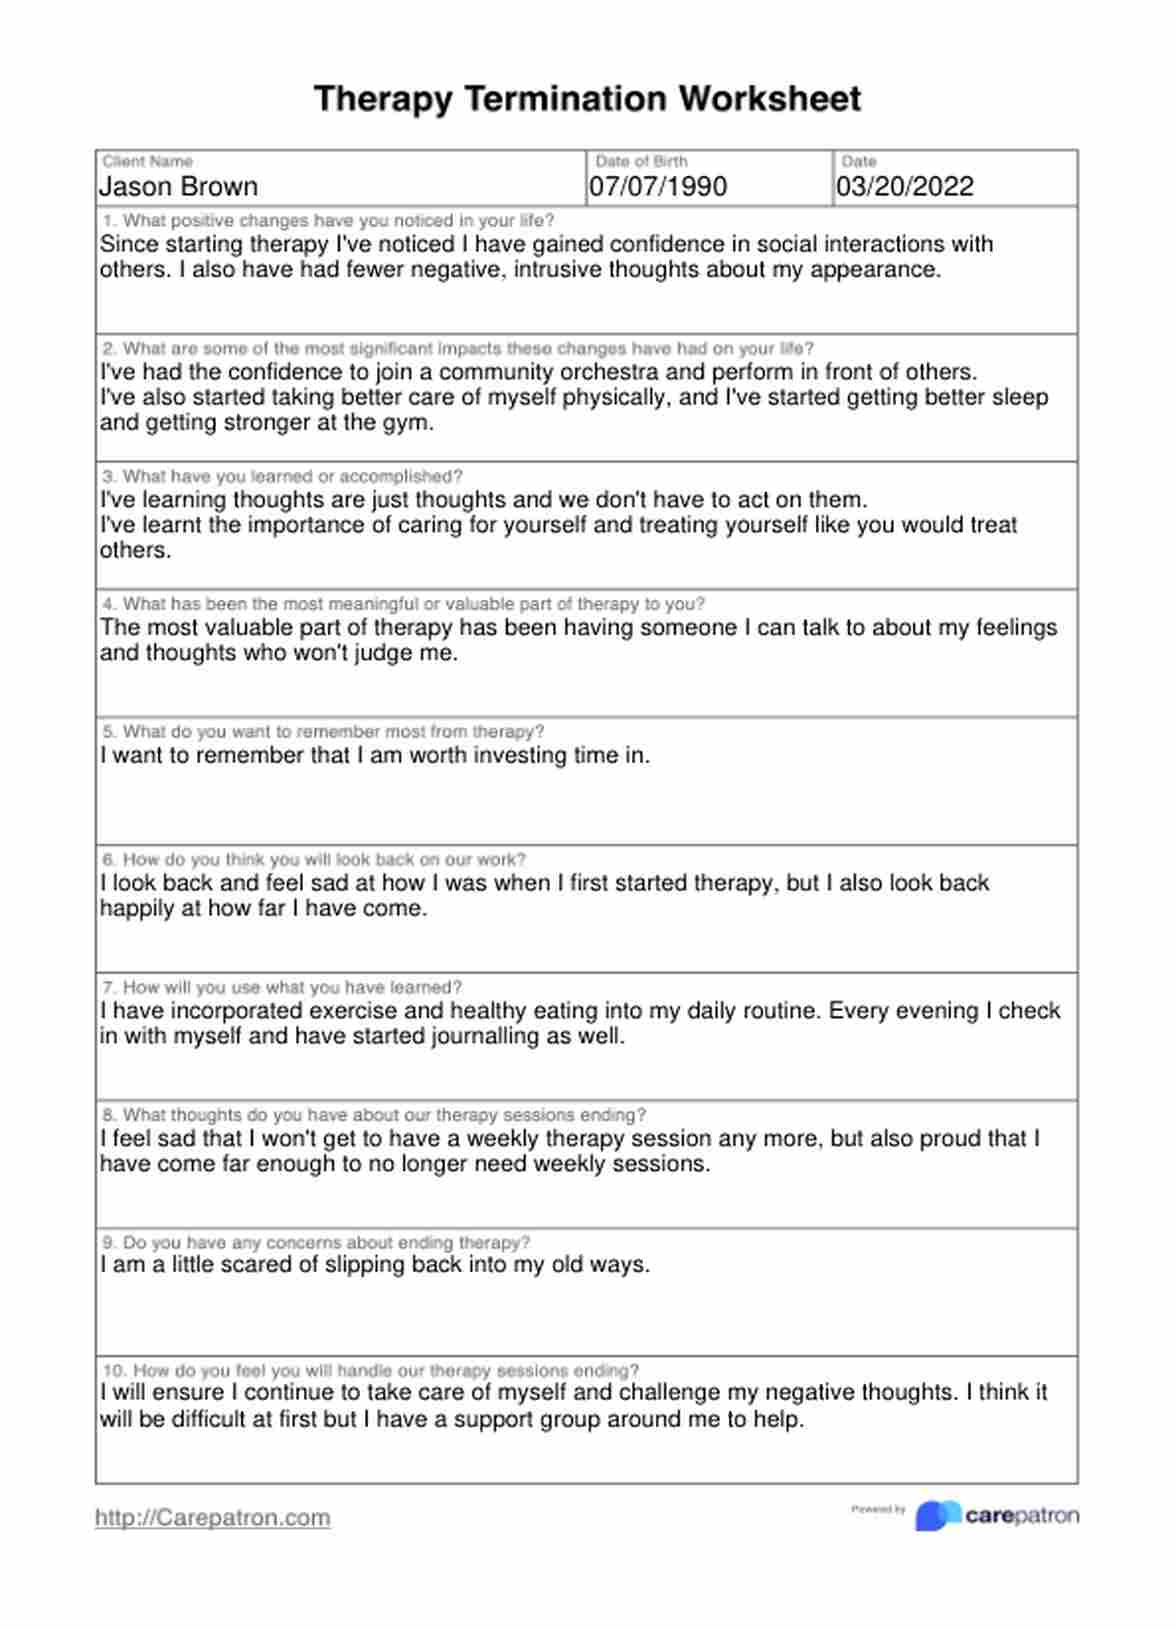 Therapy Termination Worksheet PDF Example